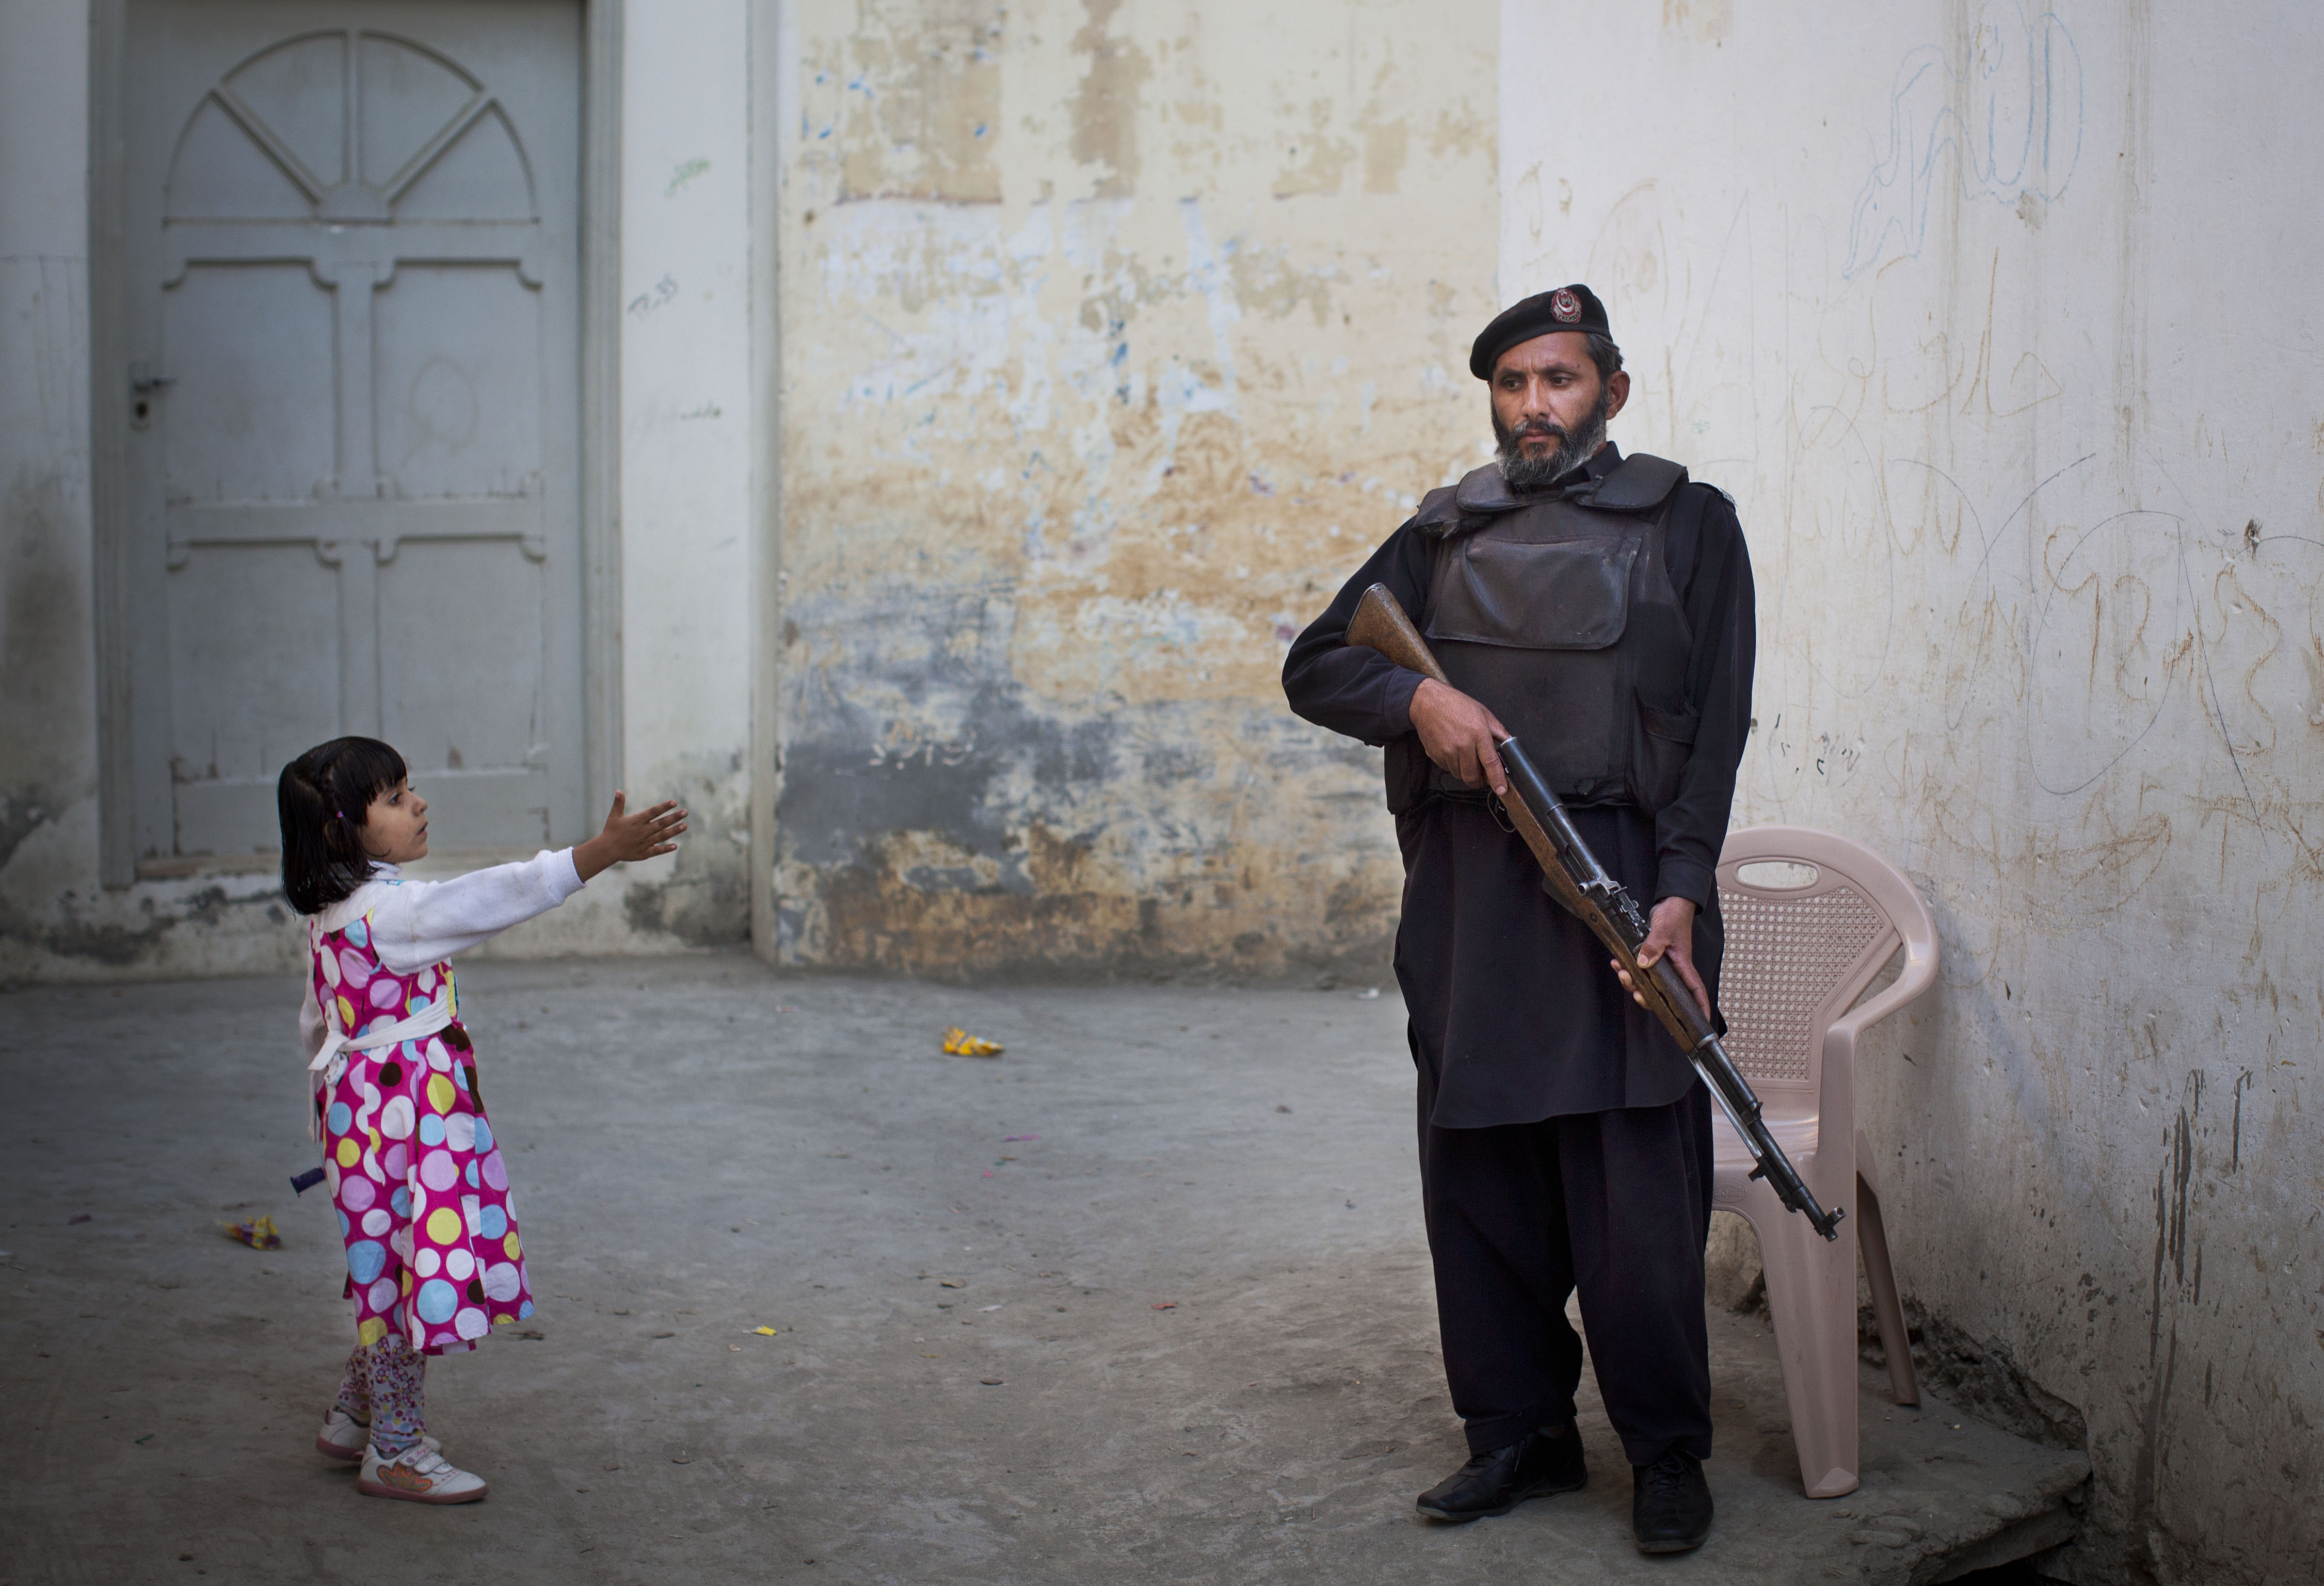 In this Nov. 15, 2012 photo, a young girl reaches out to greet a Pakistani policeman securing the road outside Kainat Riaz's home in Mingora, Swat Valley, Pakistan. Security stepped up after Kainat was wounded by the same Taliban gunman who shot Malala Yousufzai and 13-year-old Shazia Ramazan on Oct. 8 on their way home from school. Malala was shot for her outspoken insistence on girls' education. Shazia and Kainat are to return to school this week for the first time since the shooting. (AP Photo/Anja Niedringhaus)